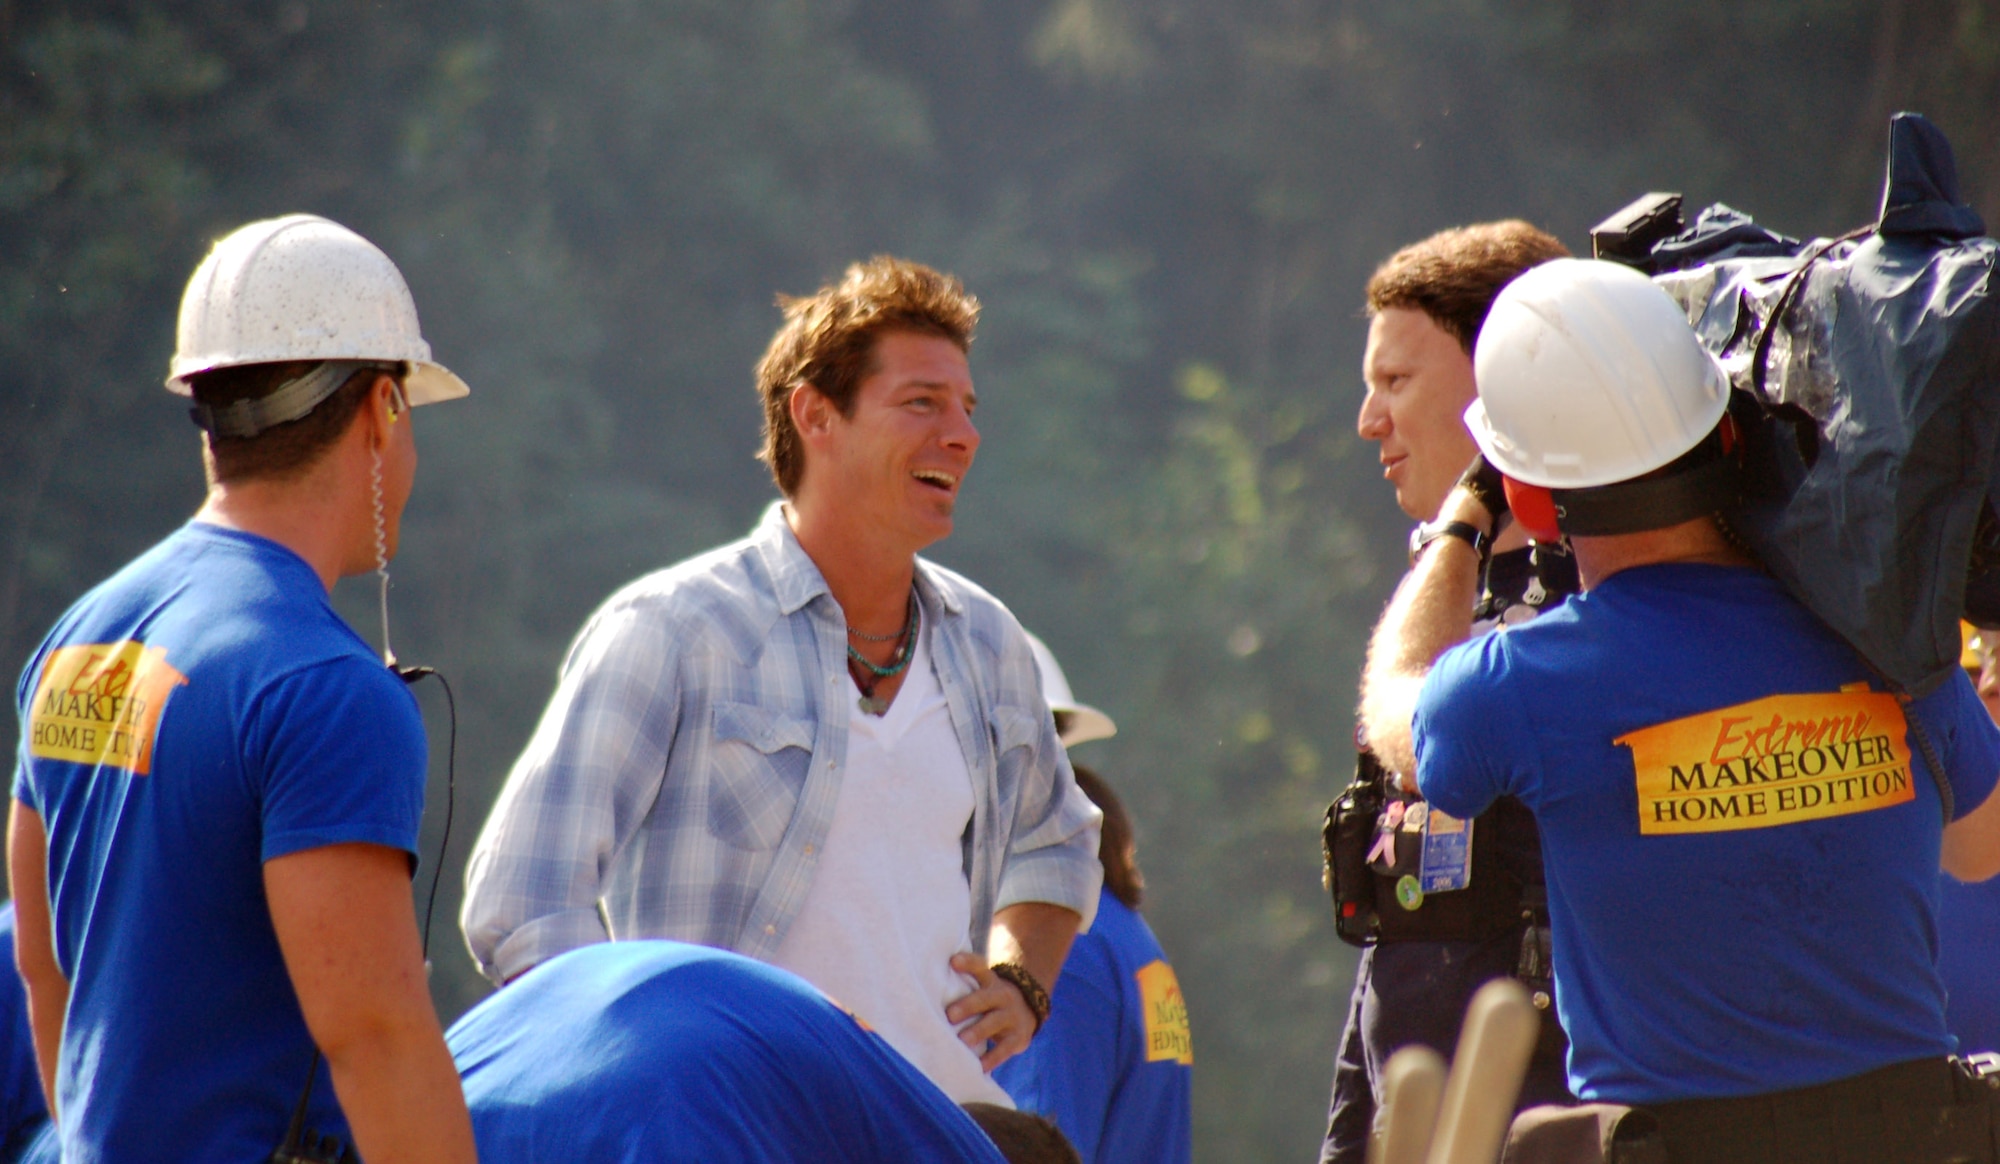 Ty Pennington, the star of ABC's "Extreme Makeover: Home Edition," jokes with members of the production crew during the filming of the "Rogers Family" episode in North Pole, Alaska. Approximately 180 military members from Elmendorf and Eielson Air Force Bases, and Forts Richardson and Wainwright helped build a house for a woman and her 12 family members. (U.S. Air Force photo/Master Sgt. Tommie Baker)